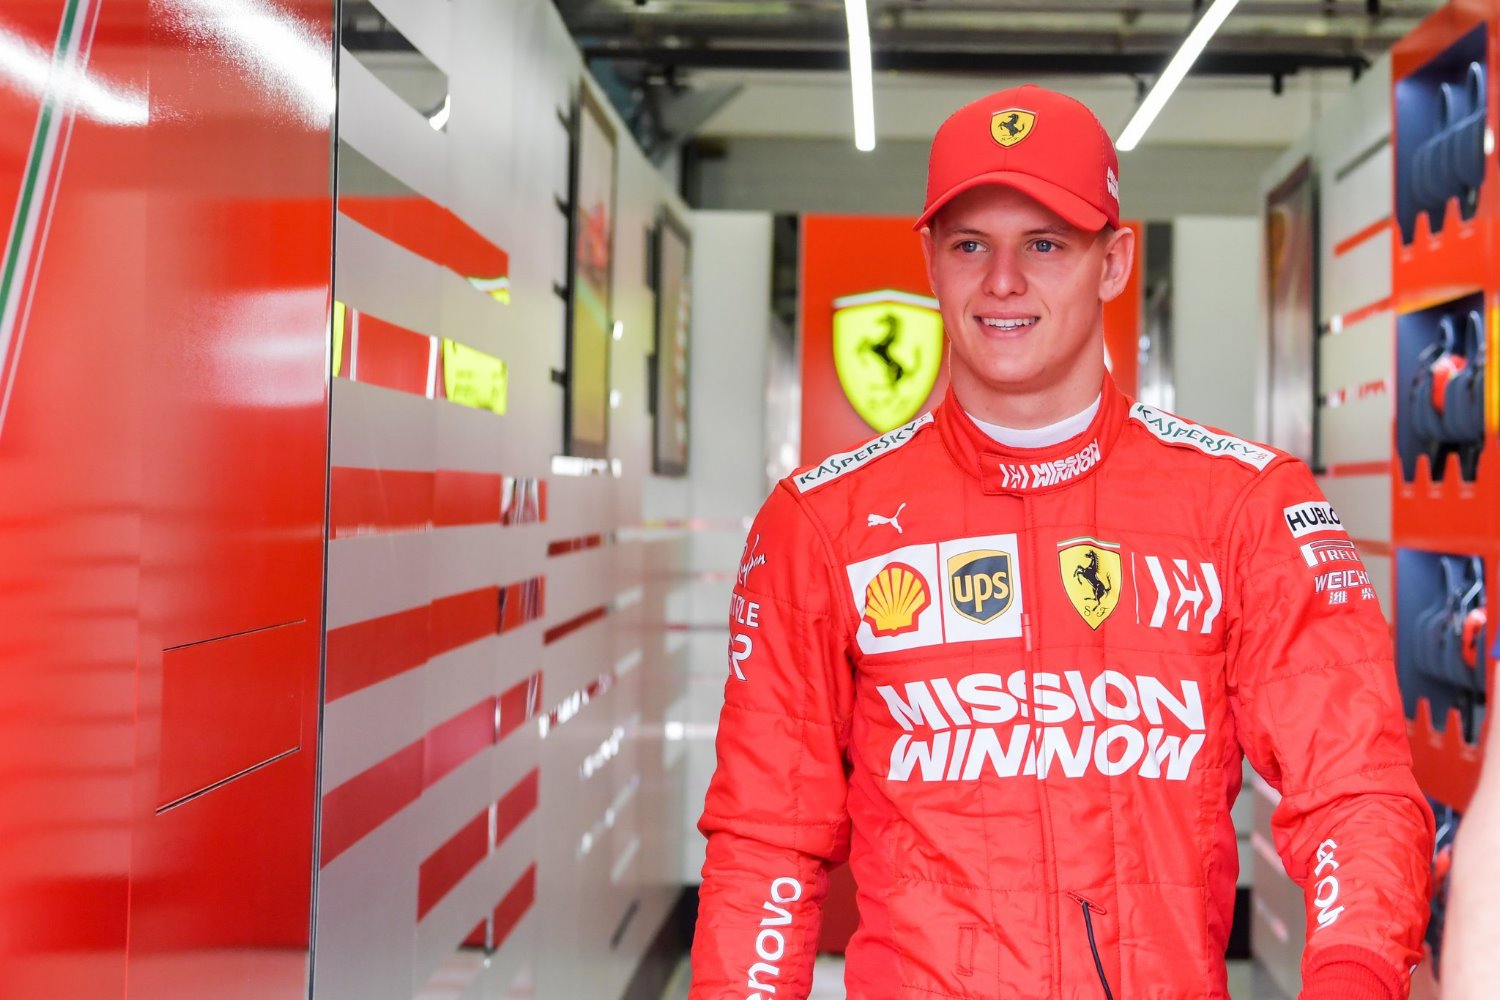 Mick Schumacher is Germany's next great hope, but he has never shown signs he could be a superstar